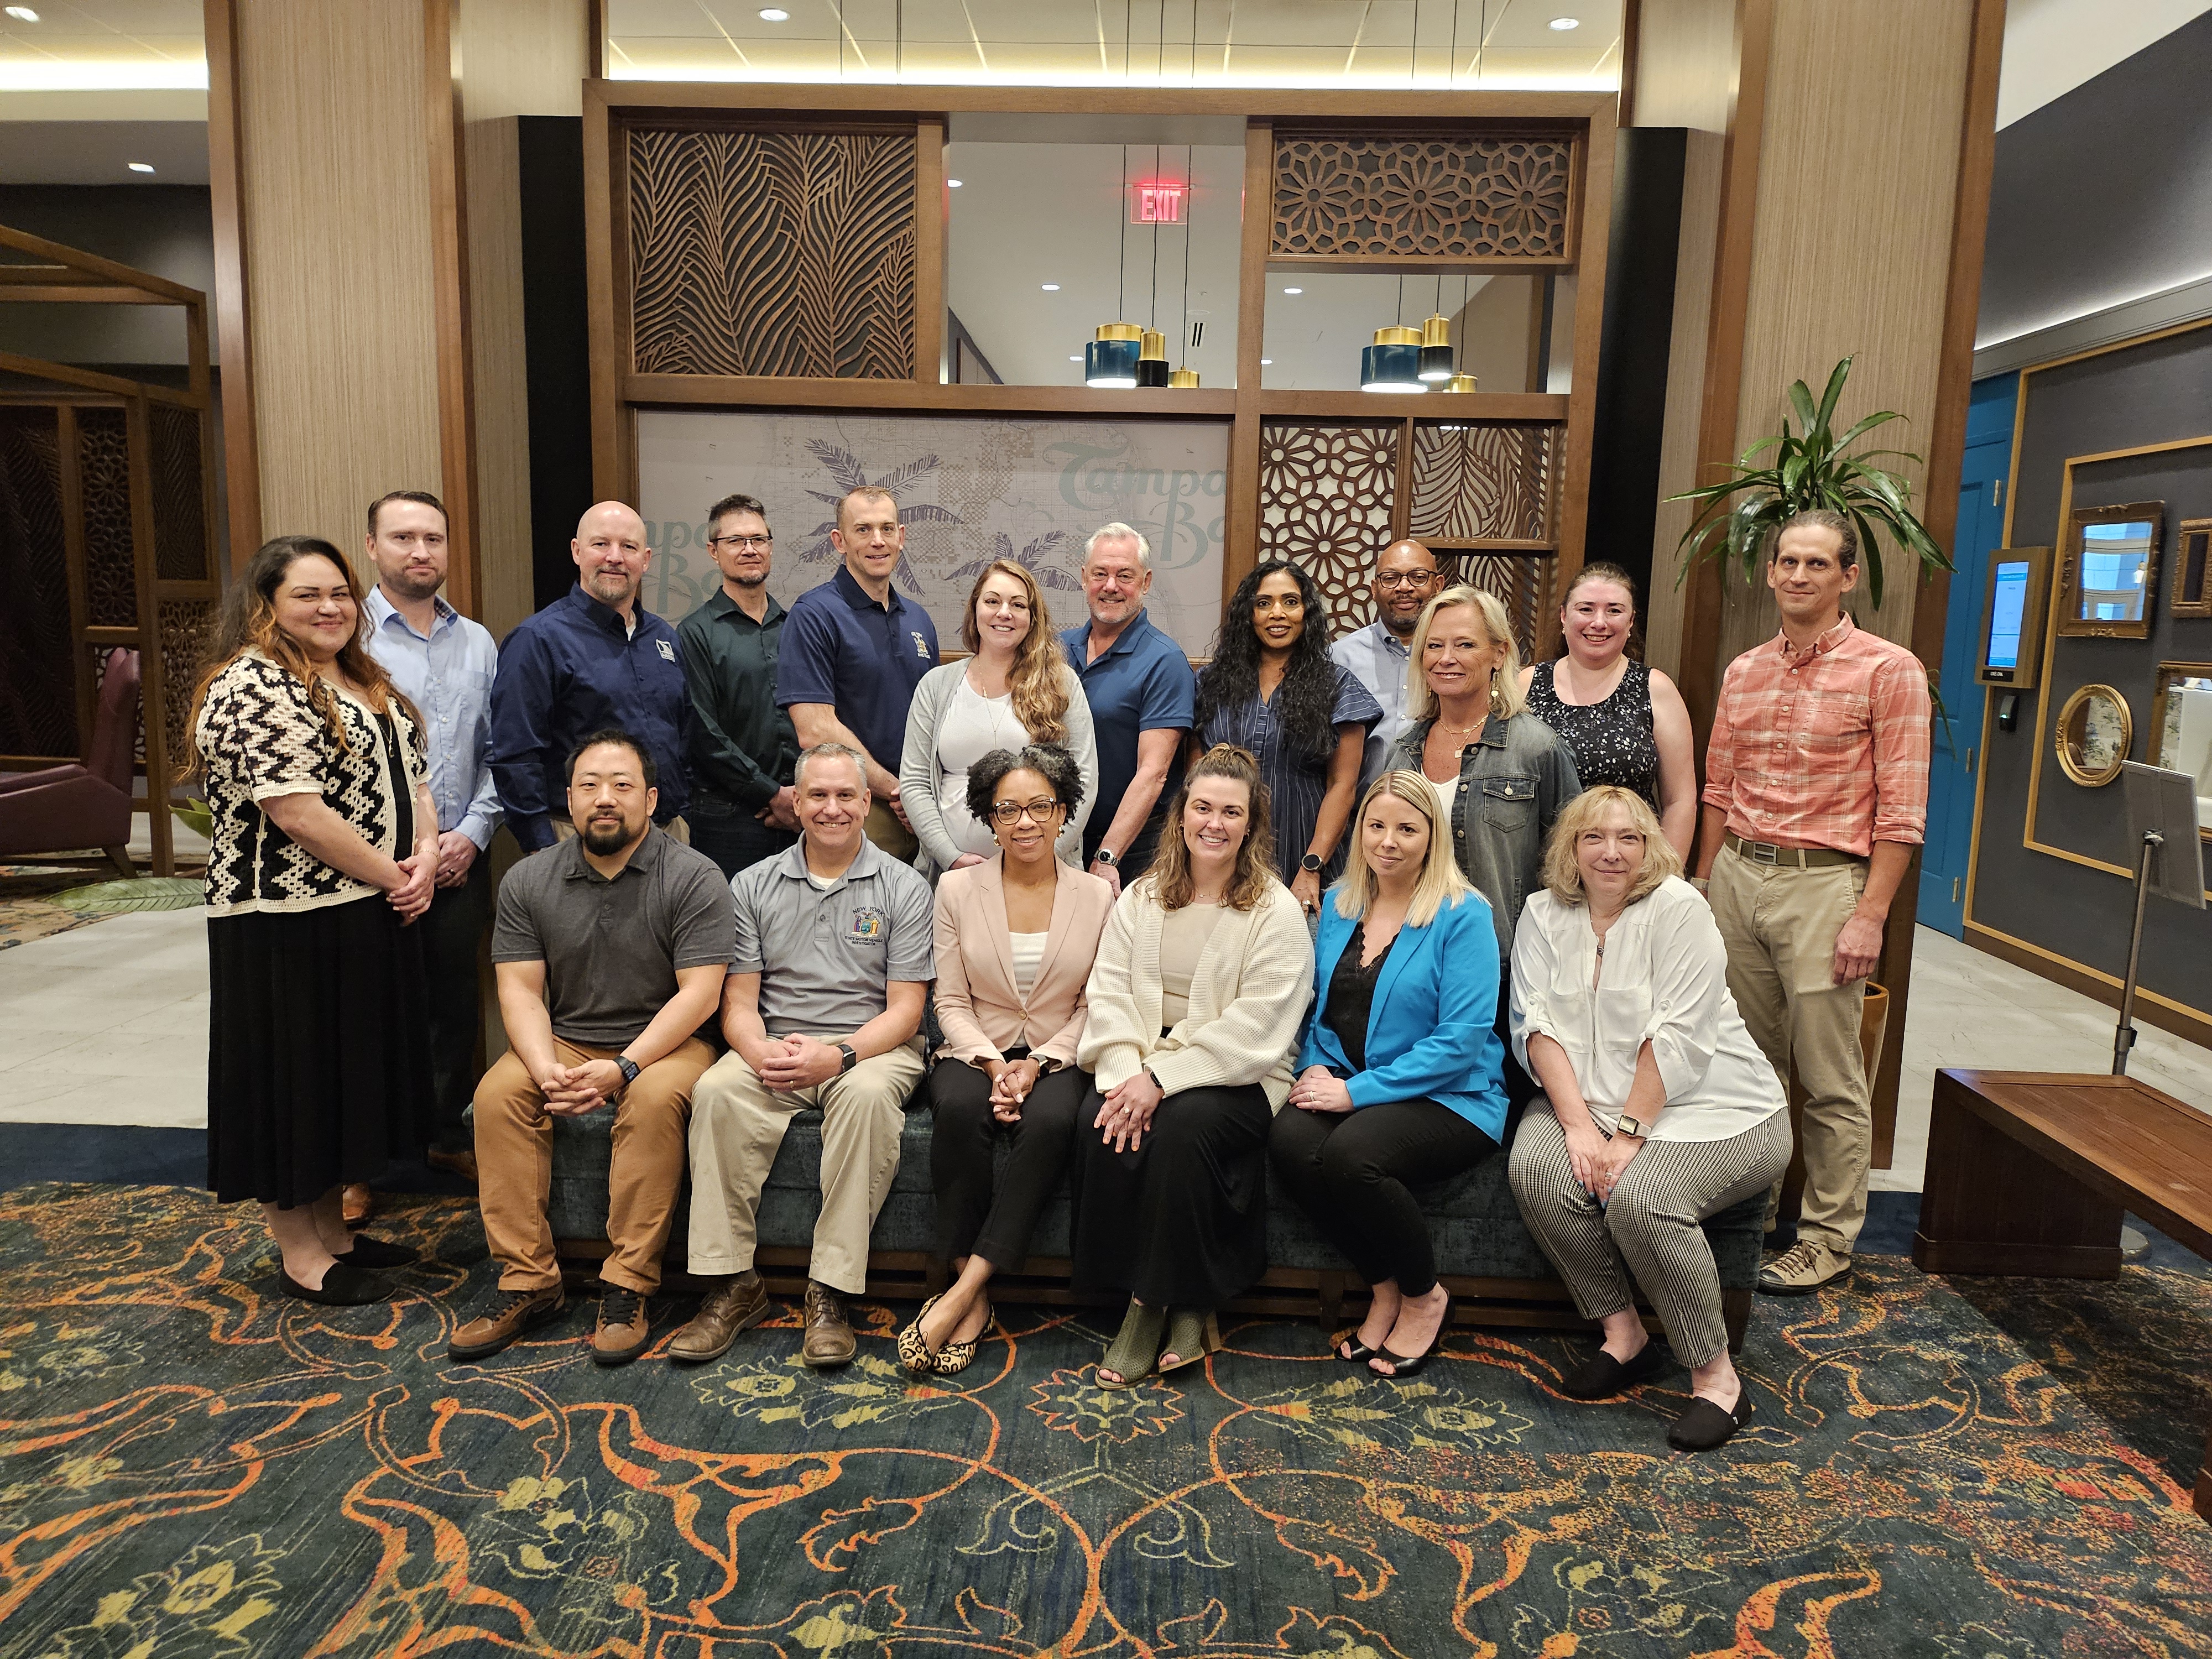 AAMVA's Joint mDL Subcommittee in Tampa